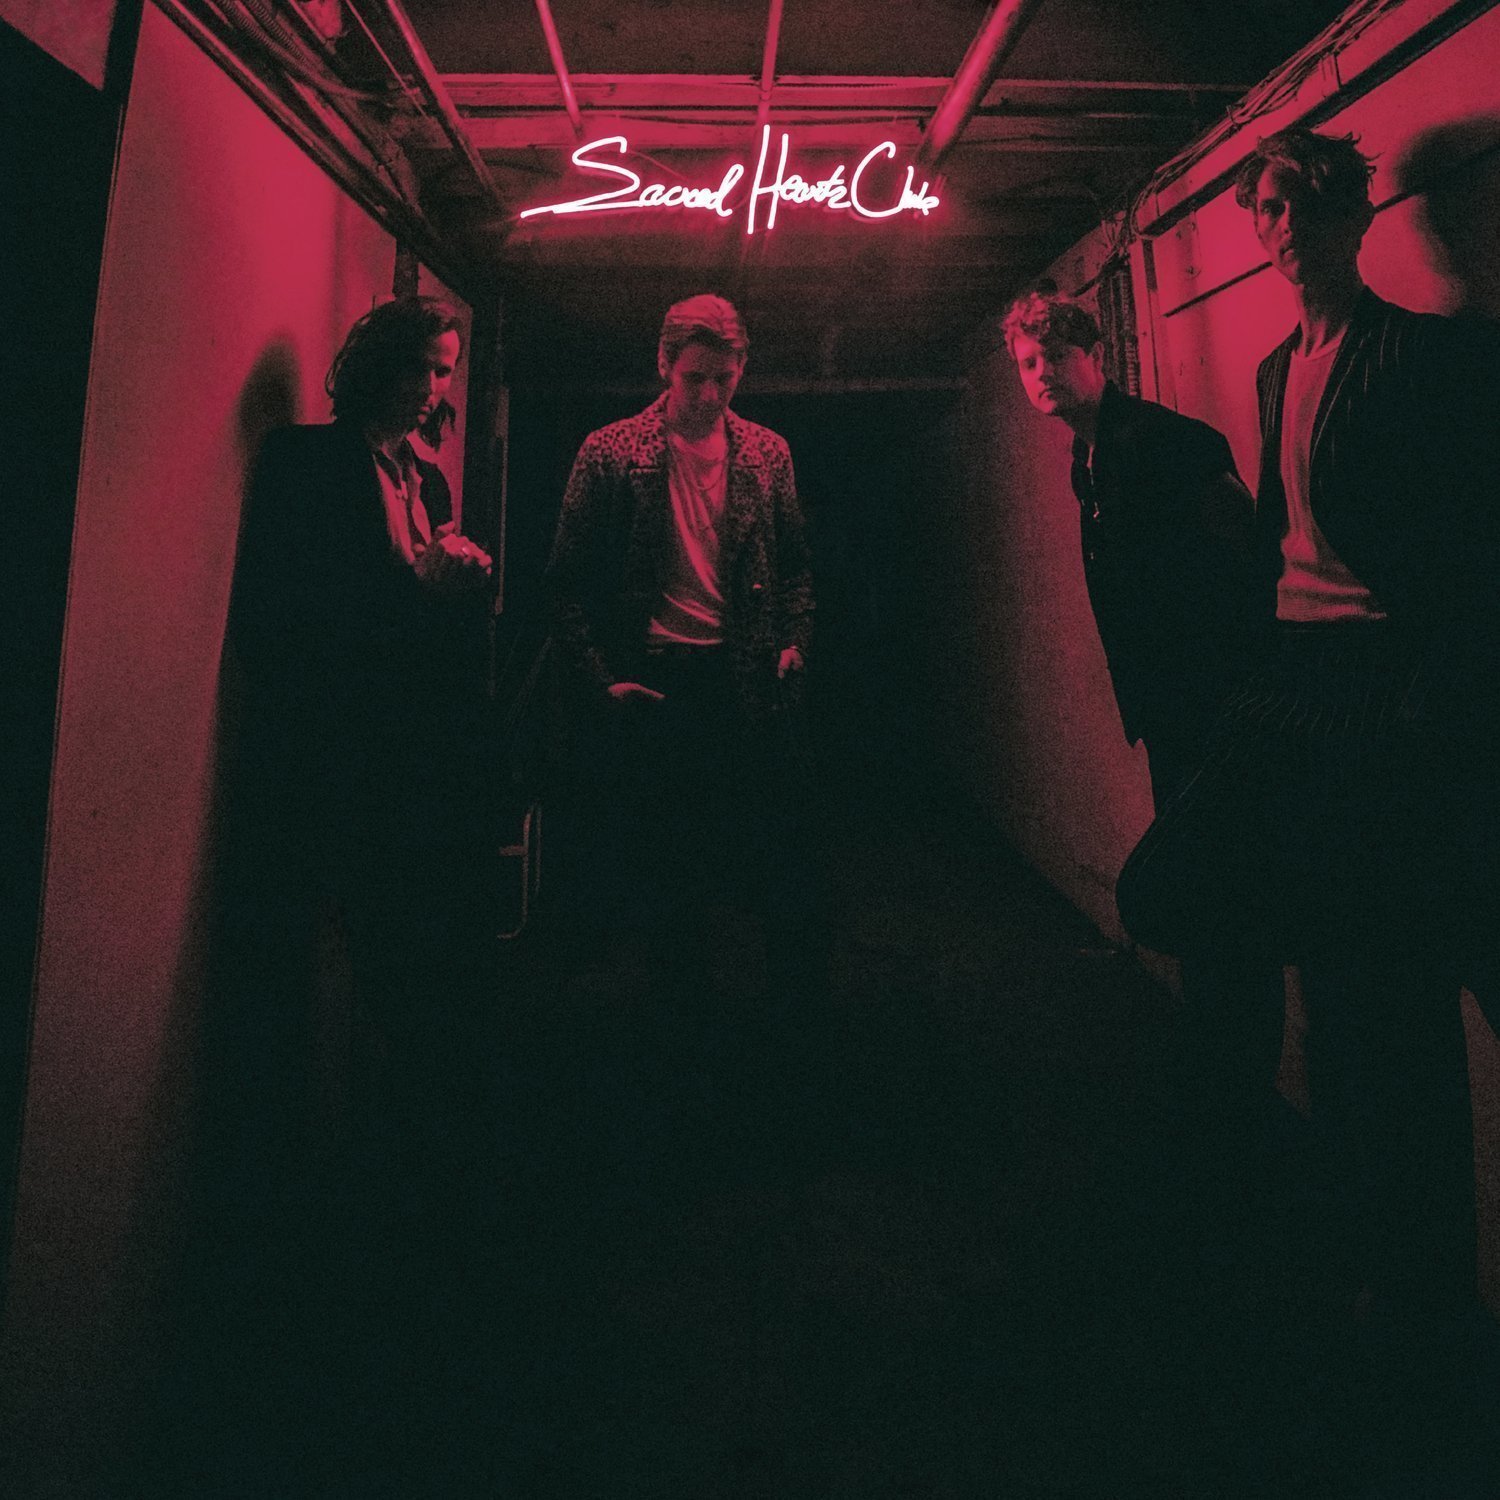 Vinyylilevy Foster The People Sacred Hearts Club (LP)